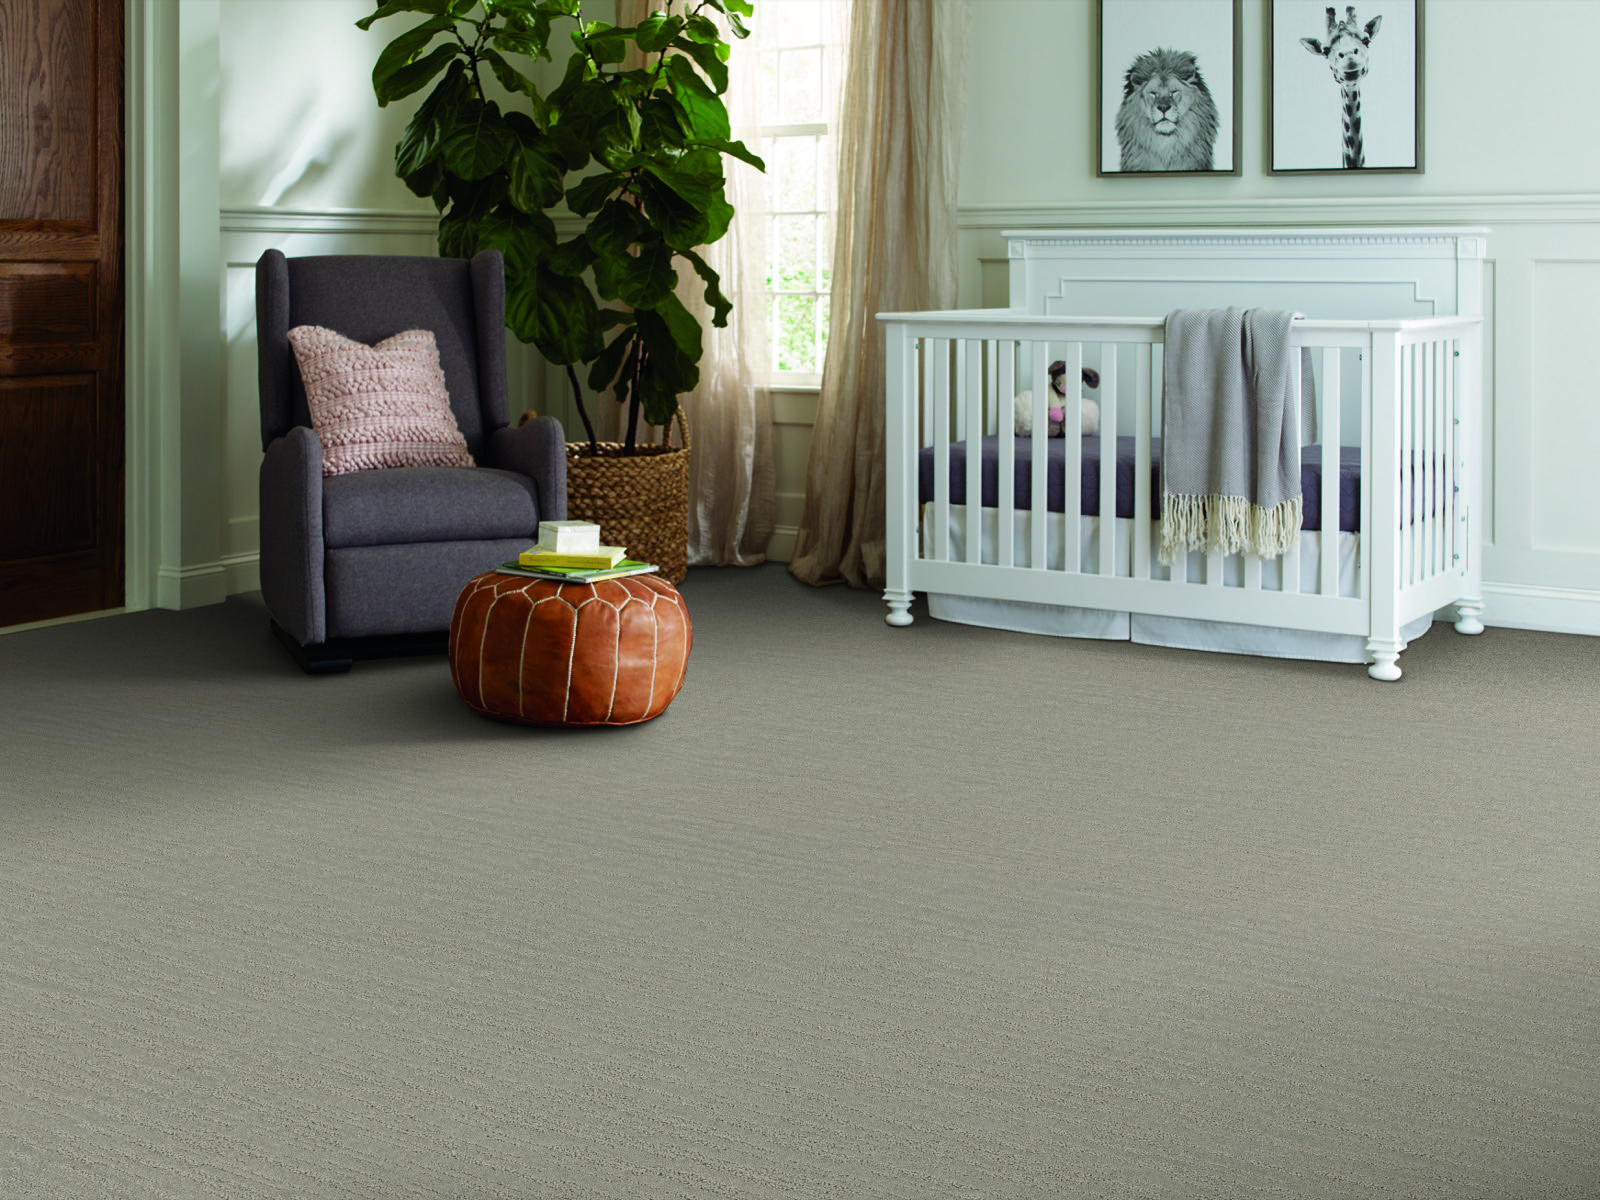 What’s The Best Type of Carpeting for the Kids Room?